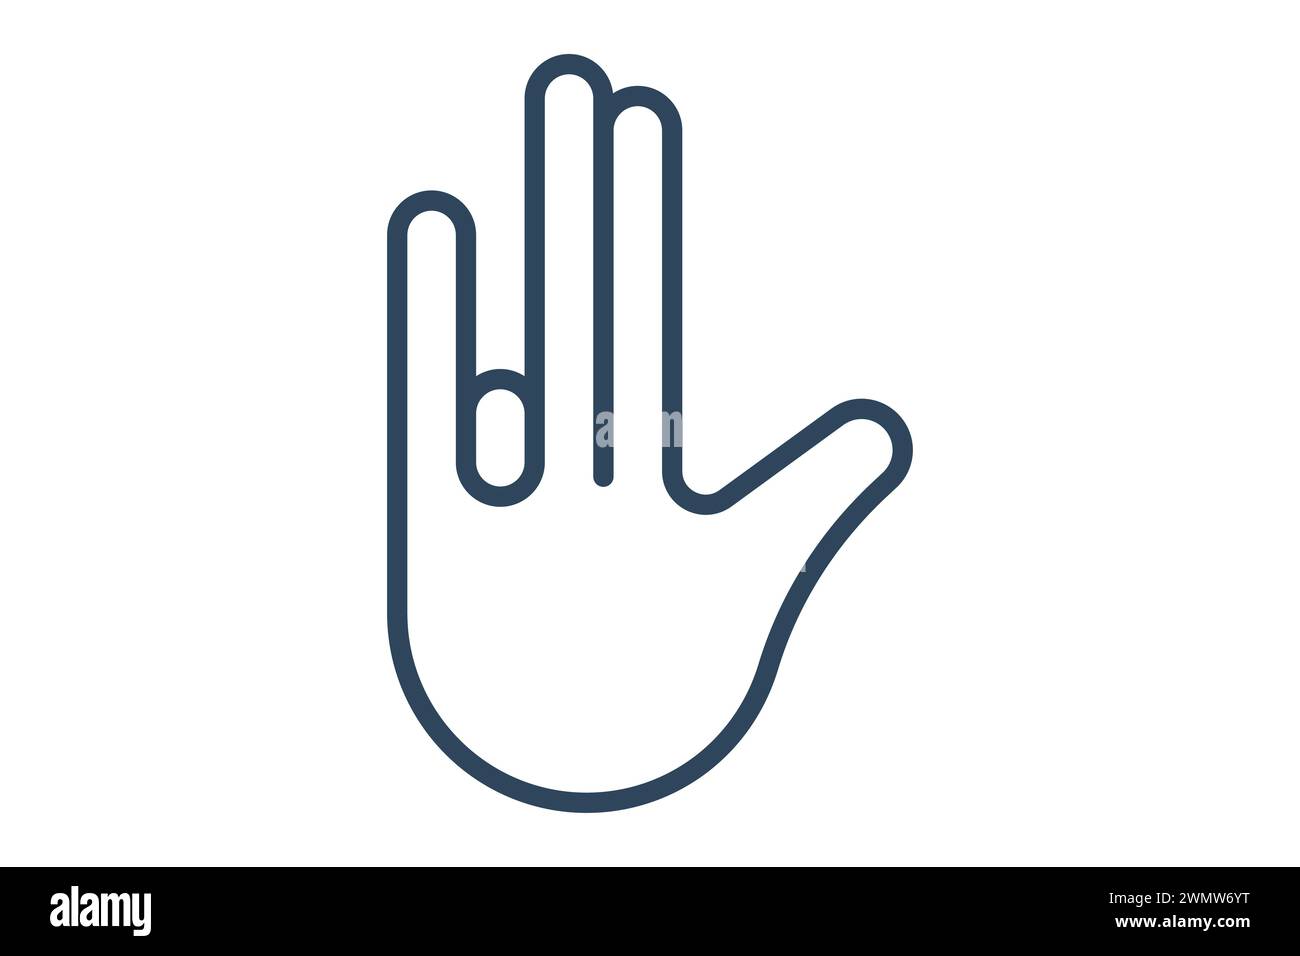 good sign language. positive good sign in with diverse hands, symbolizing approval. line icon style. element illustration Stock Vector